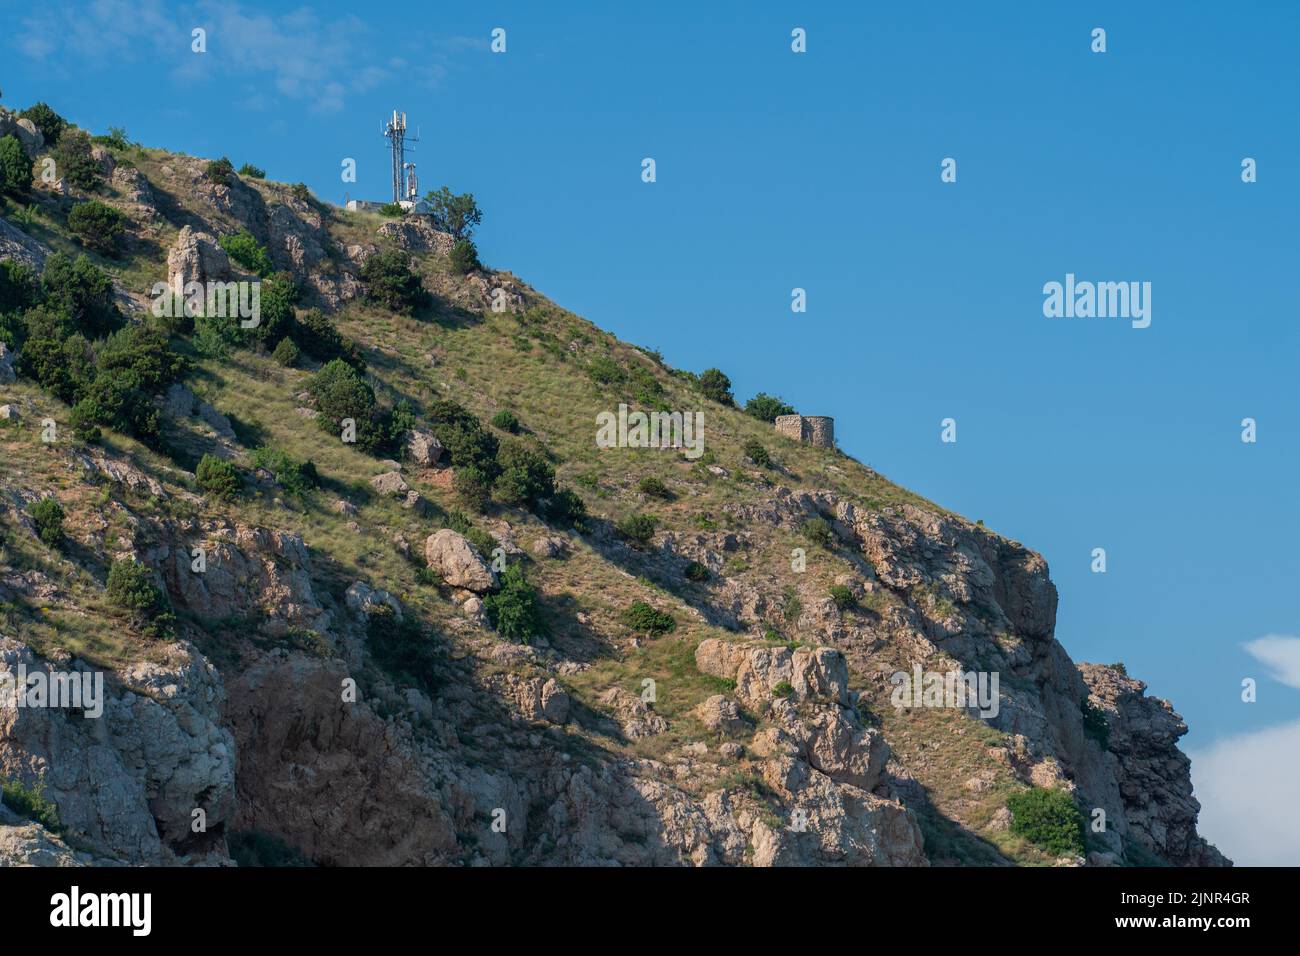 Mountains fortress balaklava bay cembalo crimea flying balaclava nature rock, concept sky summer for sevastopol for architecture building, europe view Stock Photo